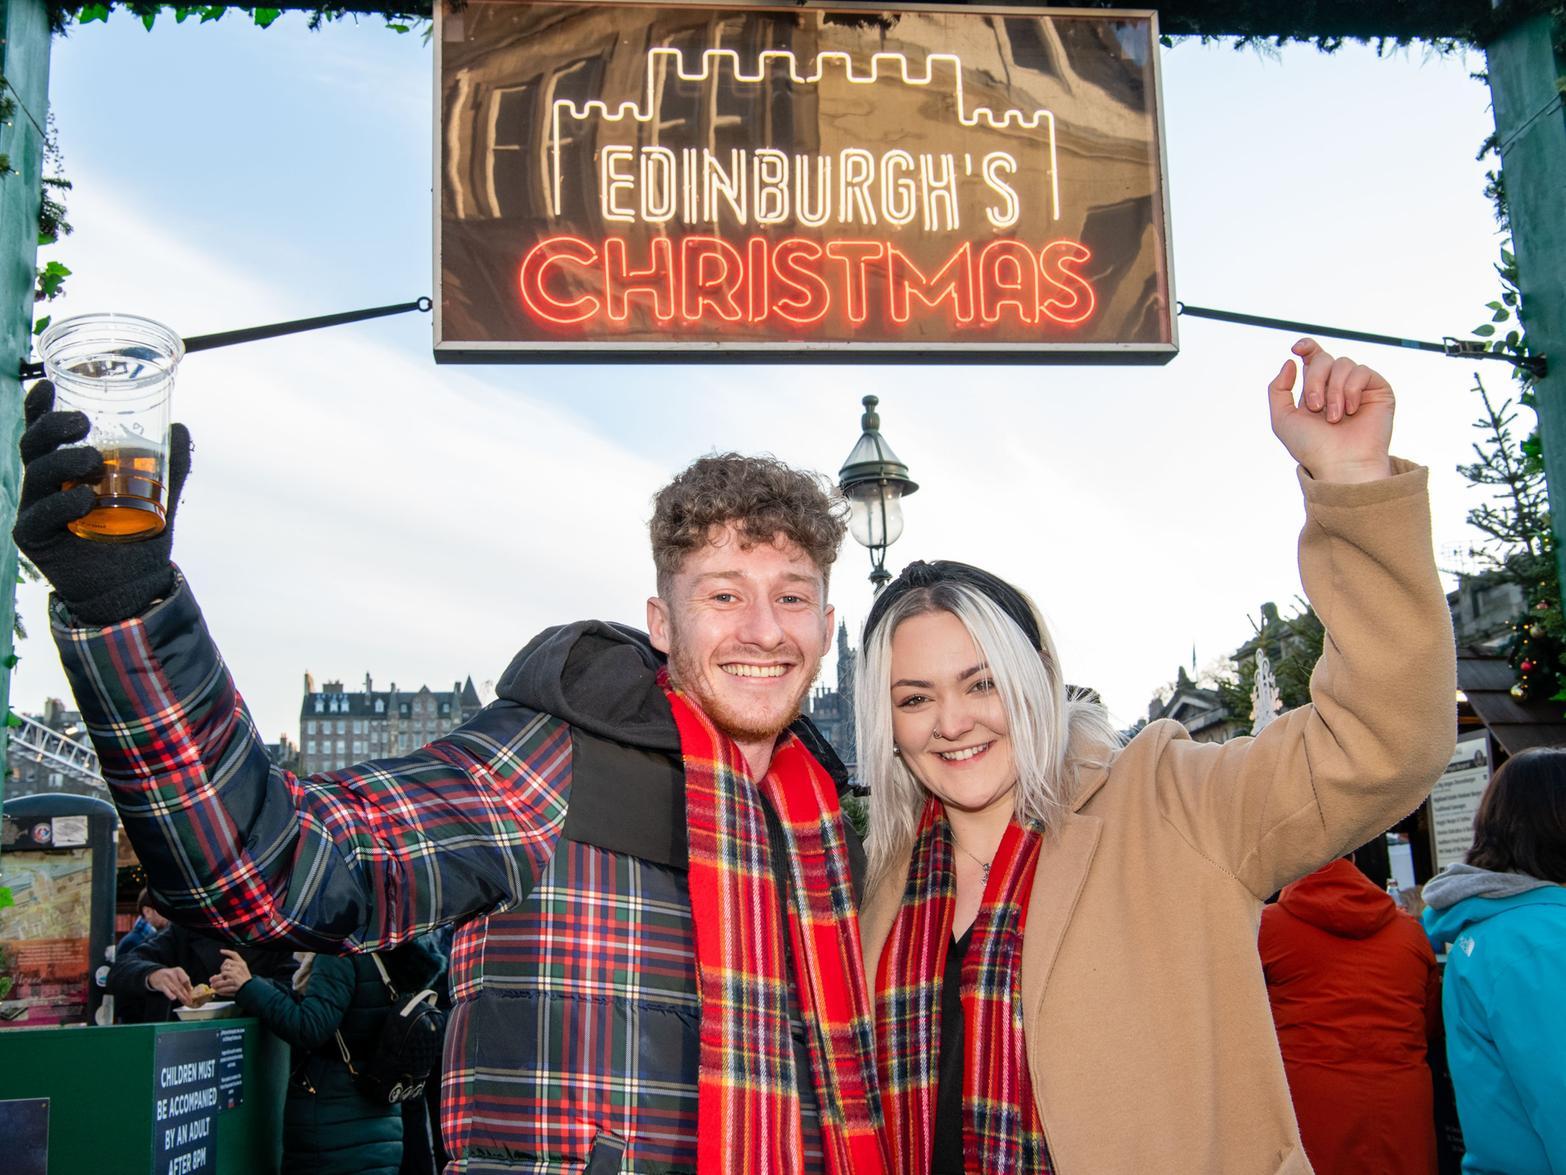 Light Night was part of Underbellys Edinburgh Christmas alongside the Christmas Market in Princes Street Gardens, which opened its doors on Saturday.